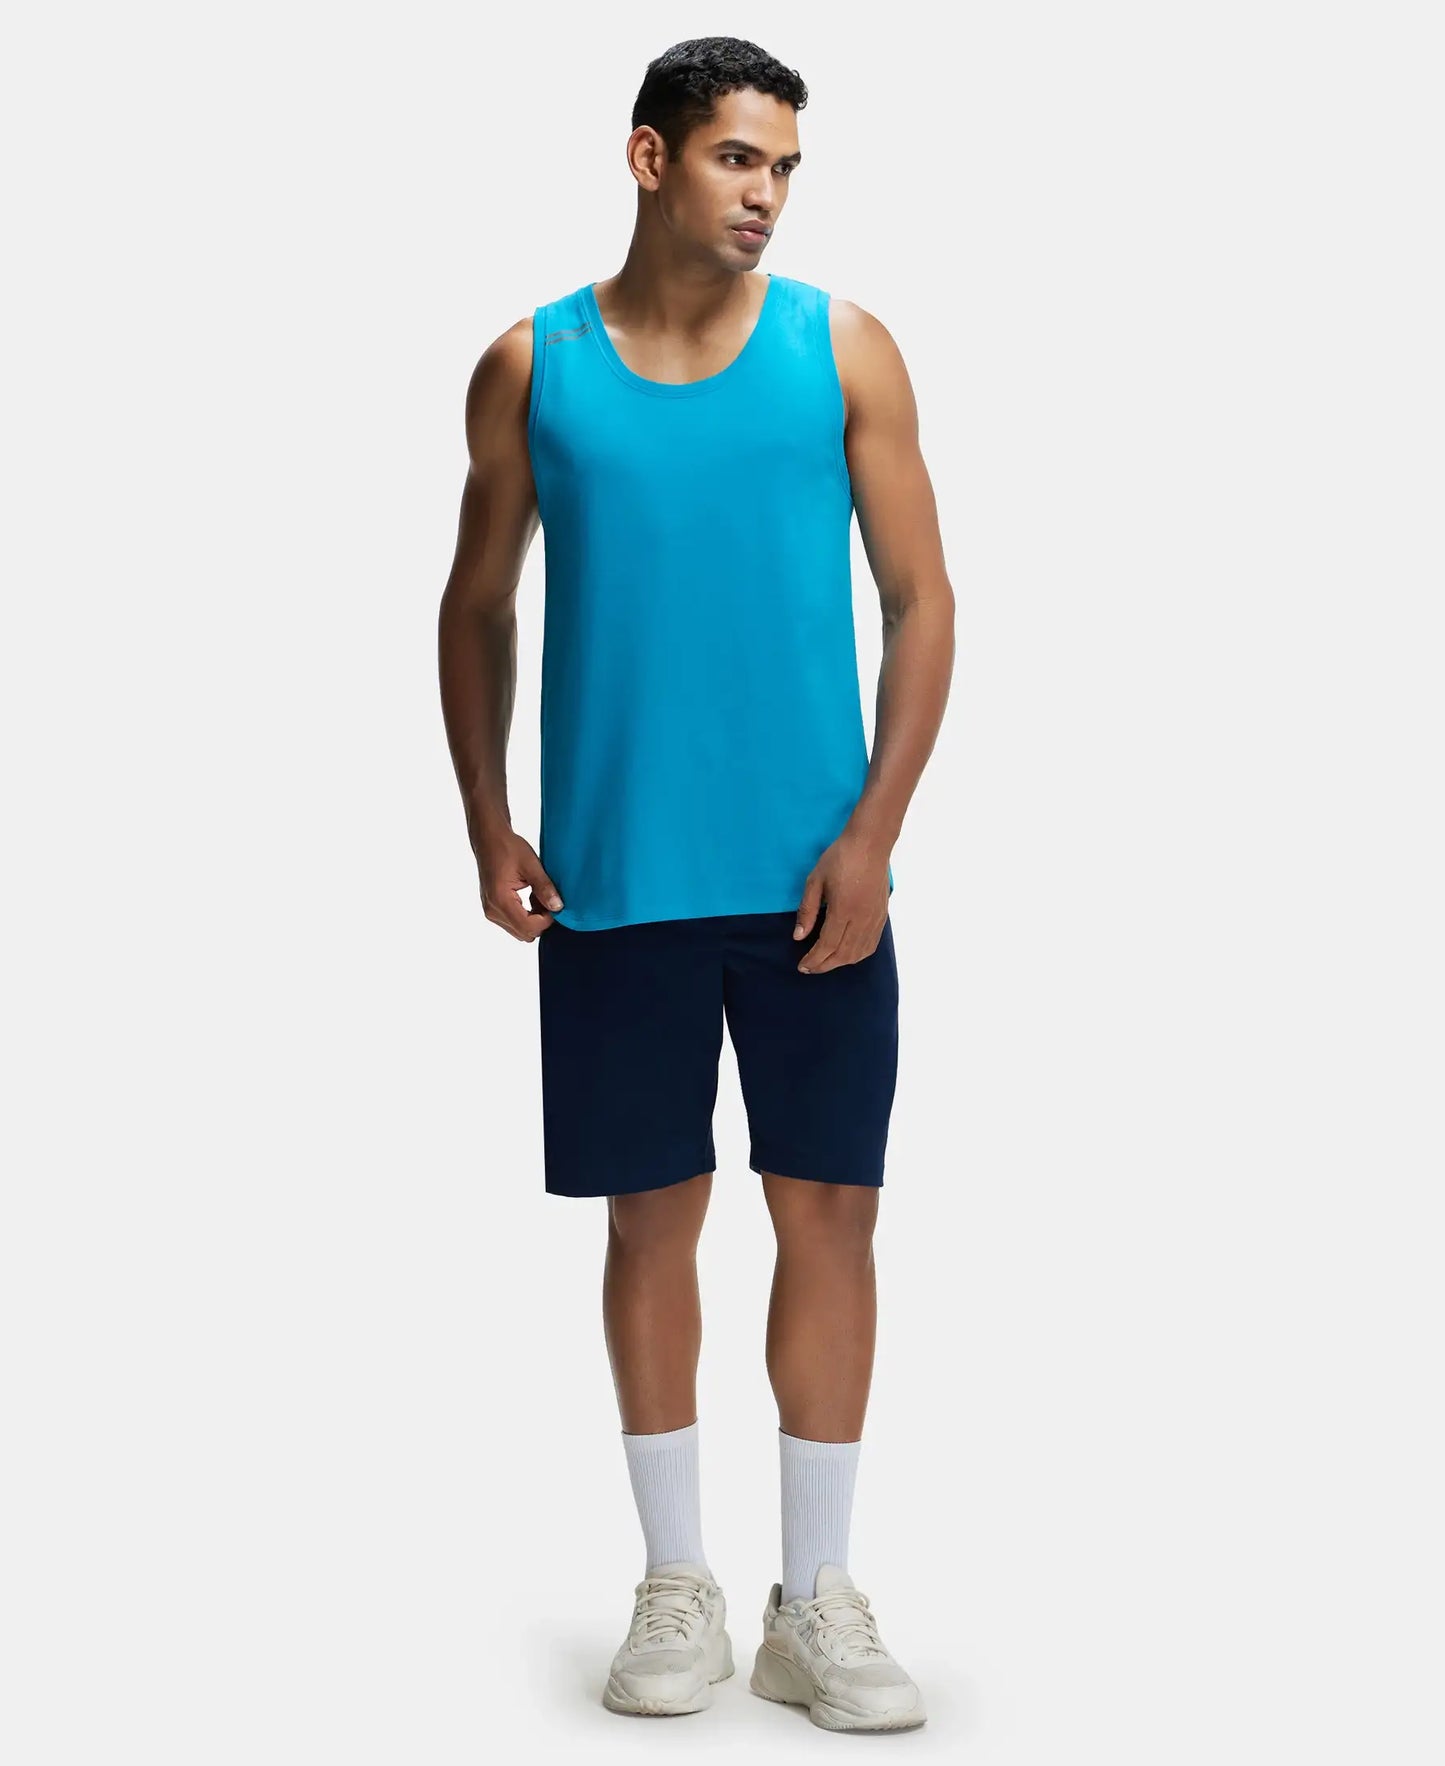 Super Combed Cotton Blend Solid Performance Tank Top with Breathable Mesh - Caribbean Sea-4